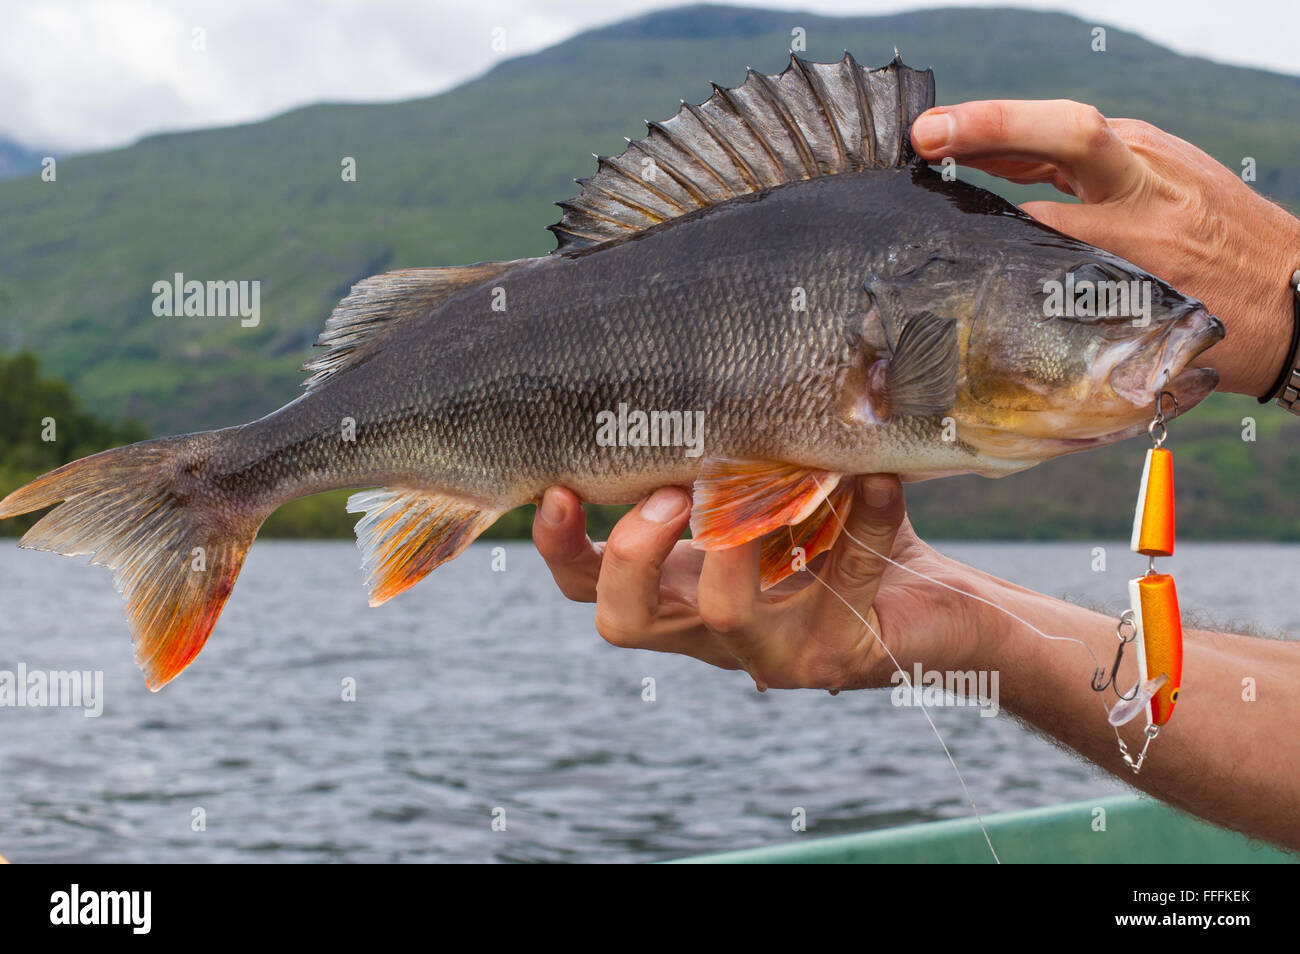 Big perch caught with an orange minnow on the hands of an angler. Lake and mountain in the background. Stock Photo